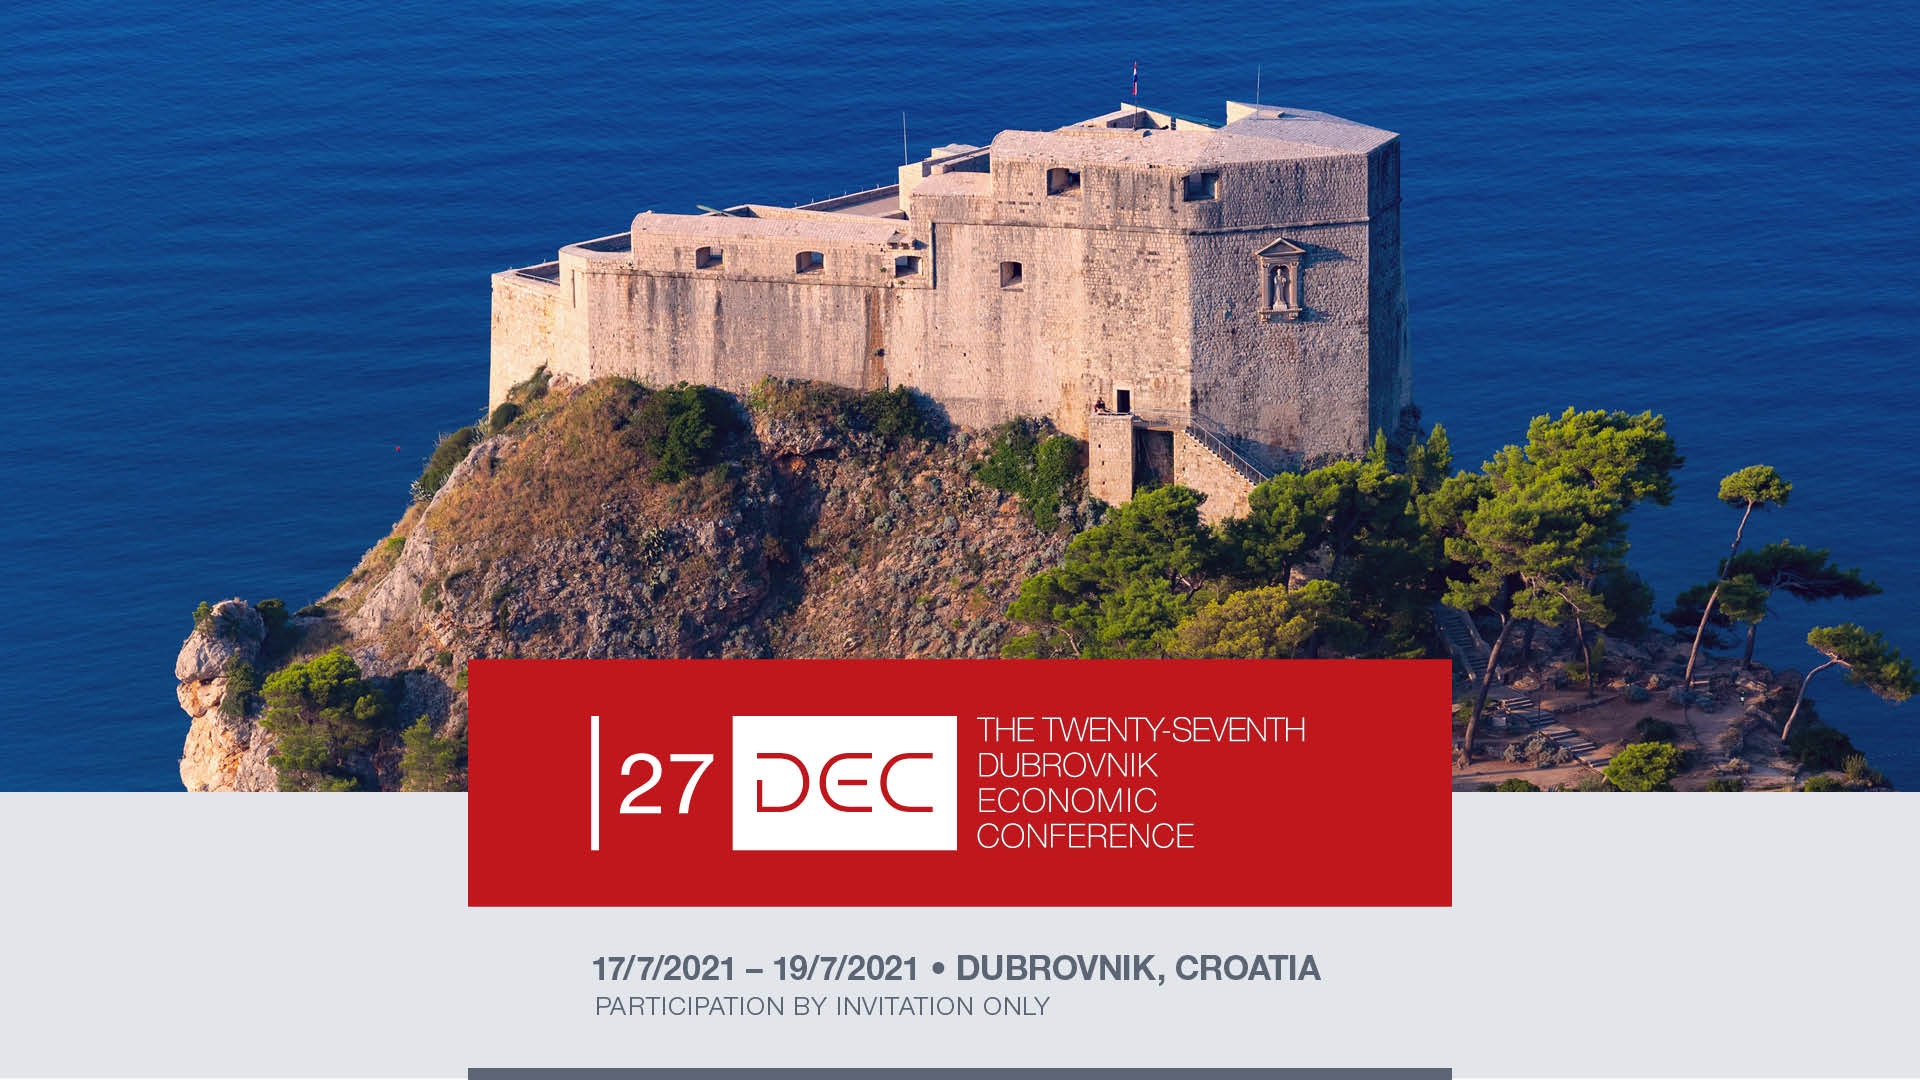 The 27th Dubrovnik Economic Conference